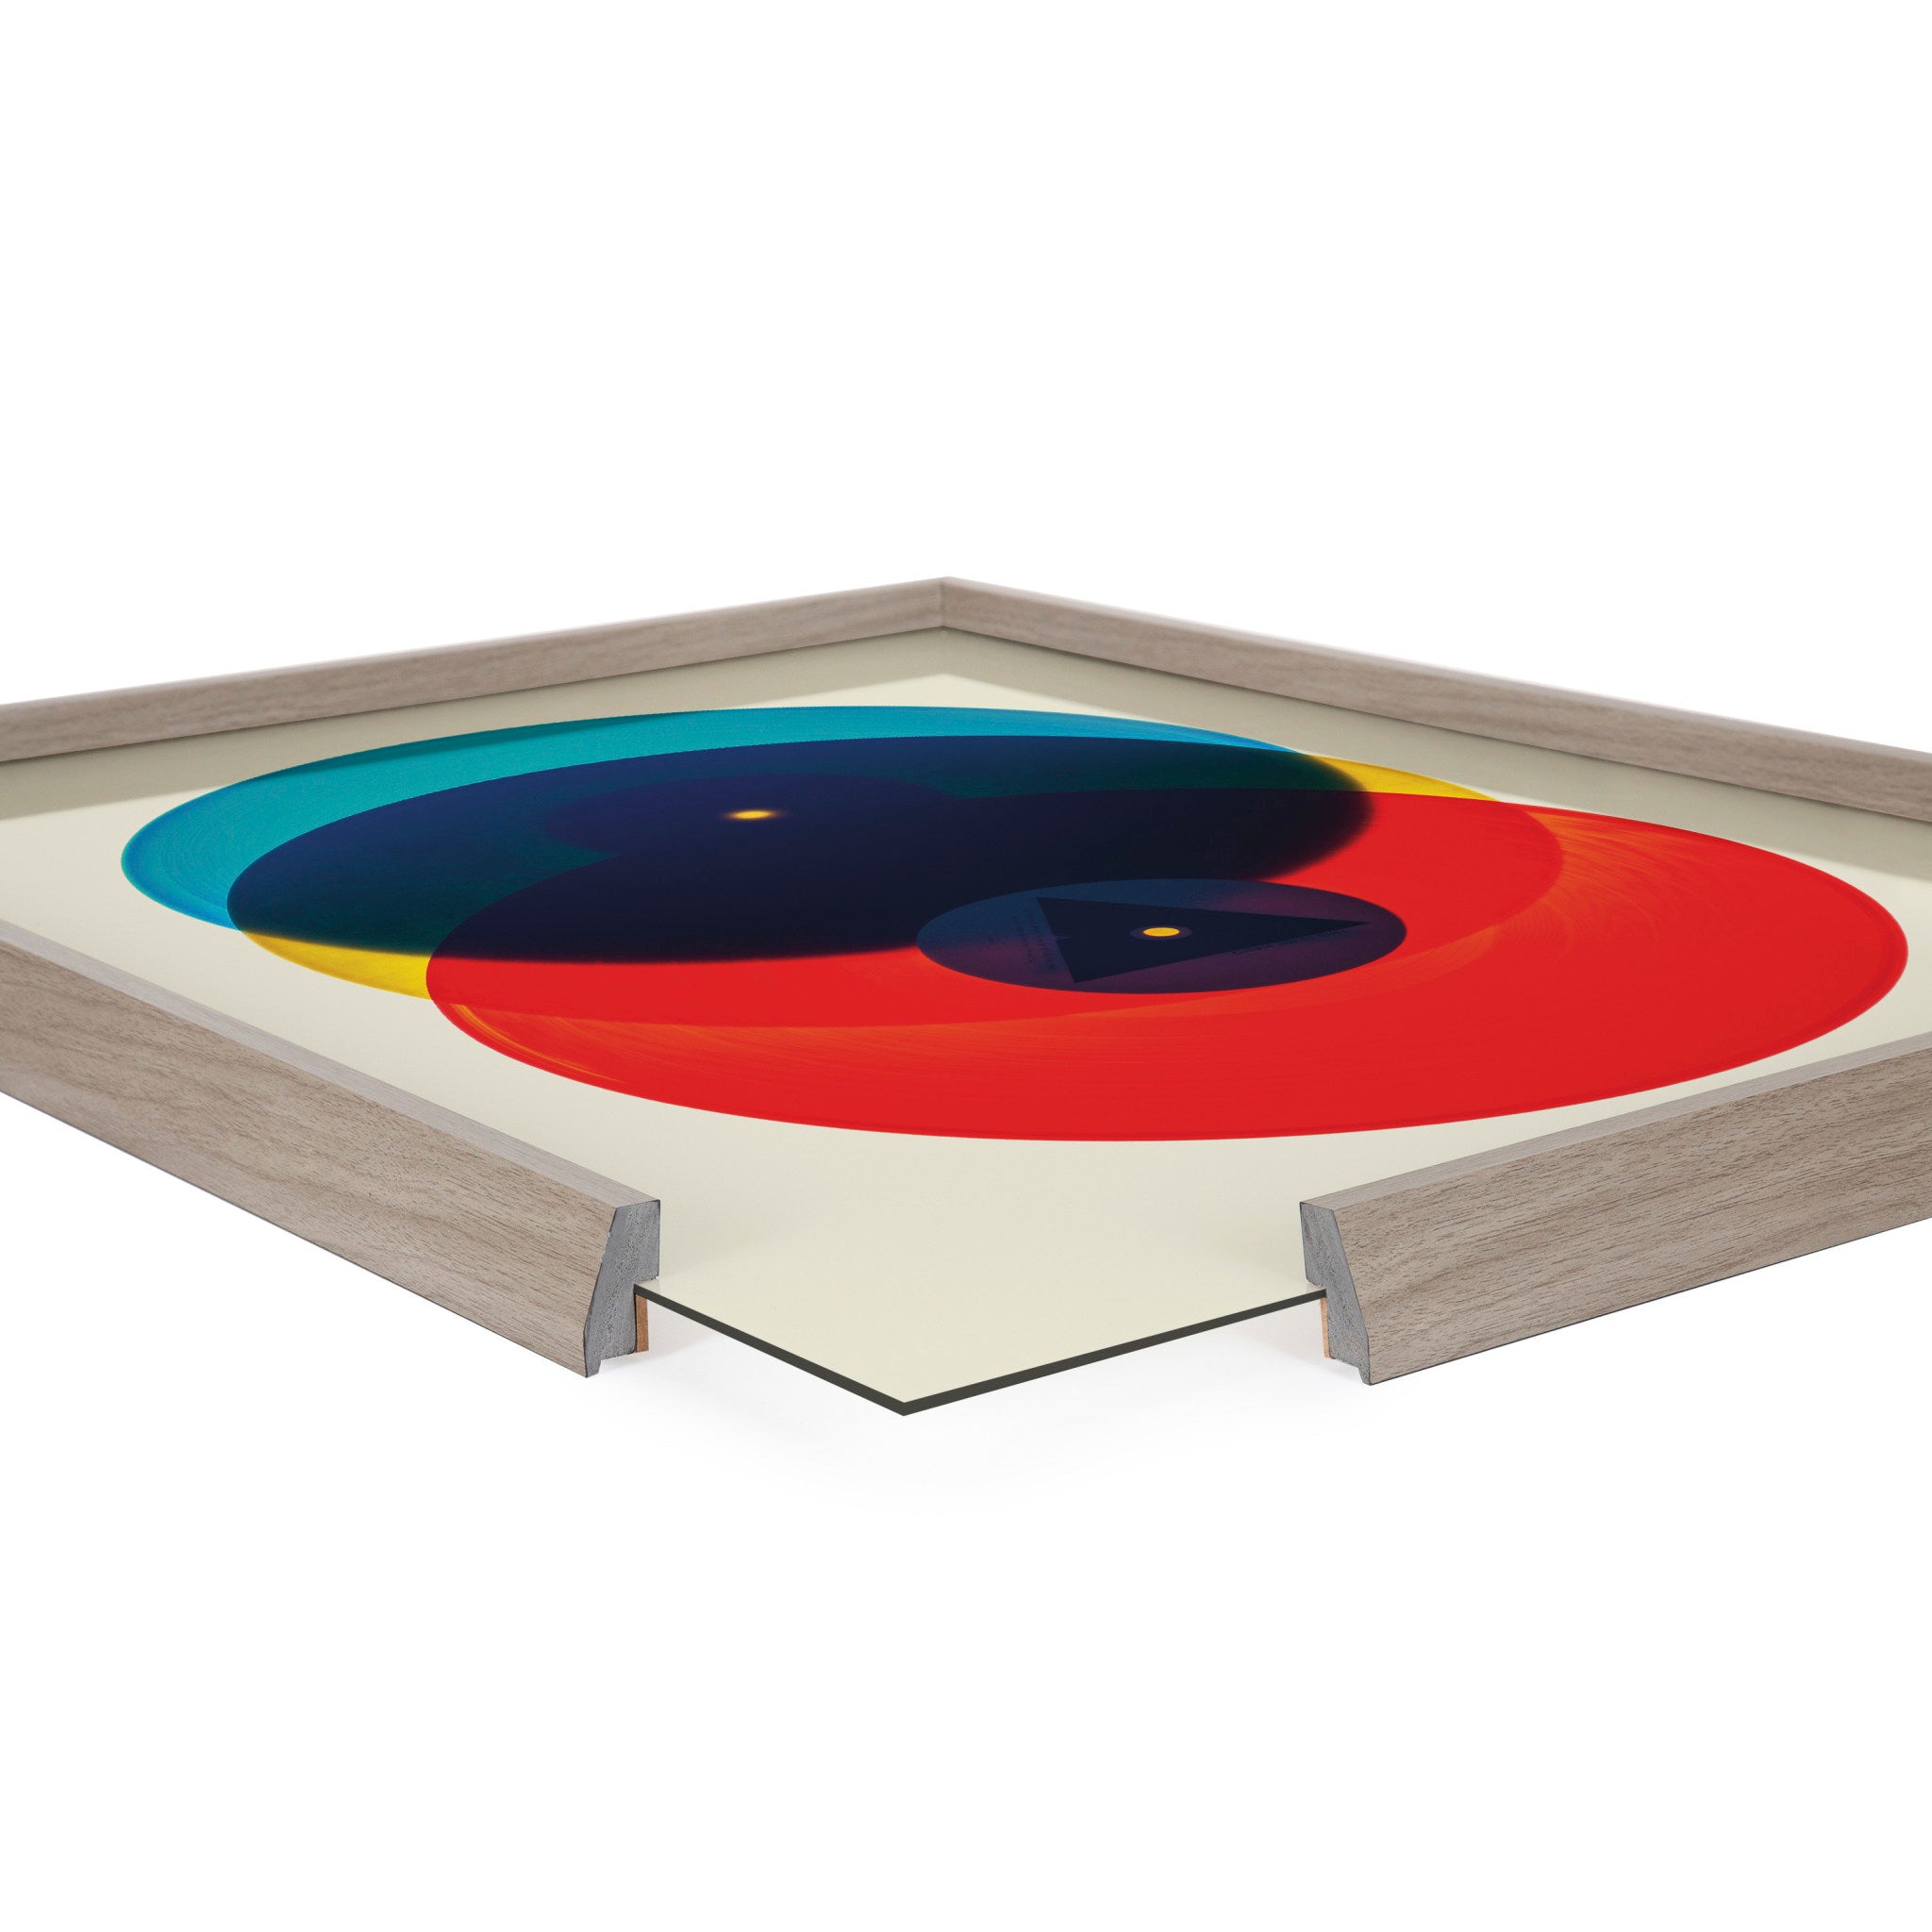 Blake Colorful Records Blue Red Framed Printed Glass by Emiko and Mark Franzen of F2Images